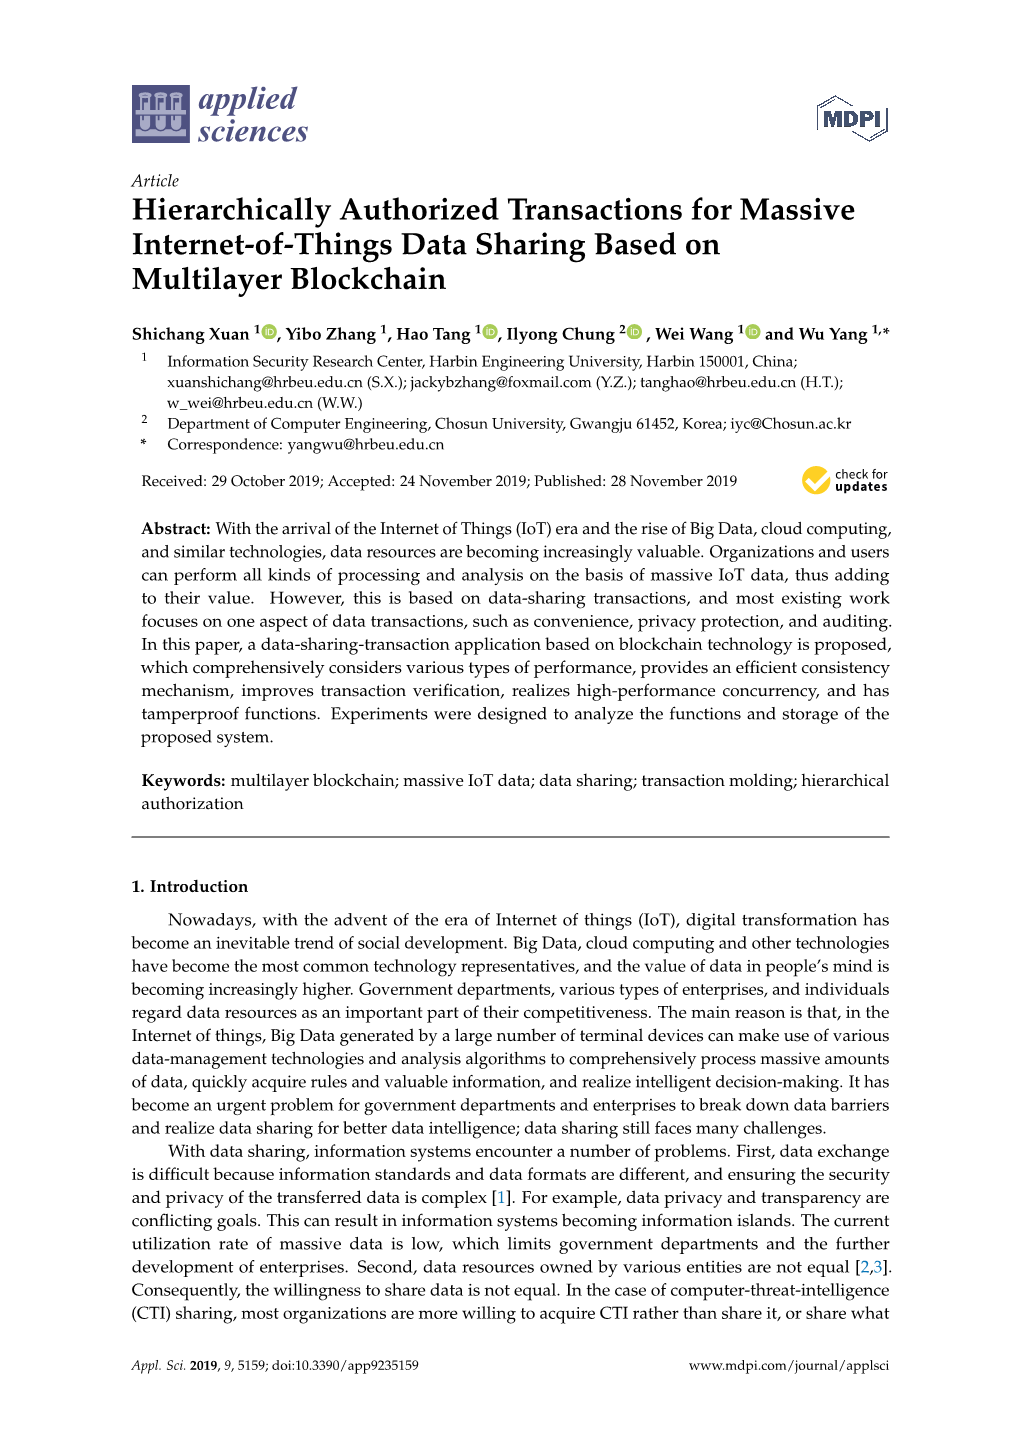 Hierarchically Authorized Transactions for Massive Internet-Of-Things Data Sharing Based on Multilayer Blockchain